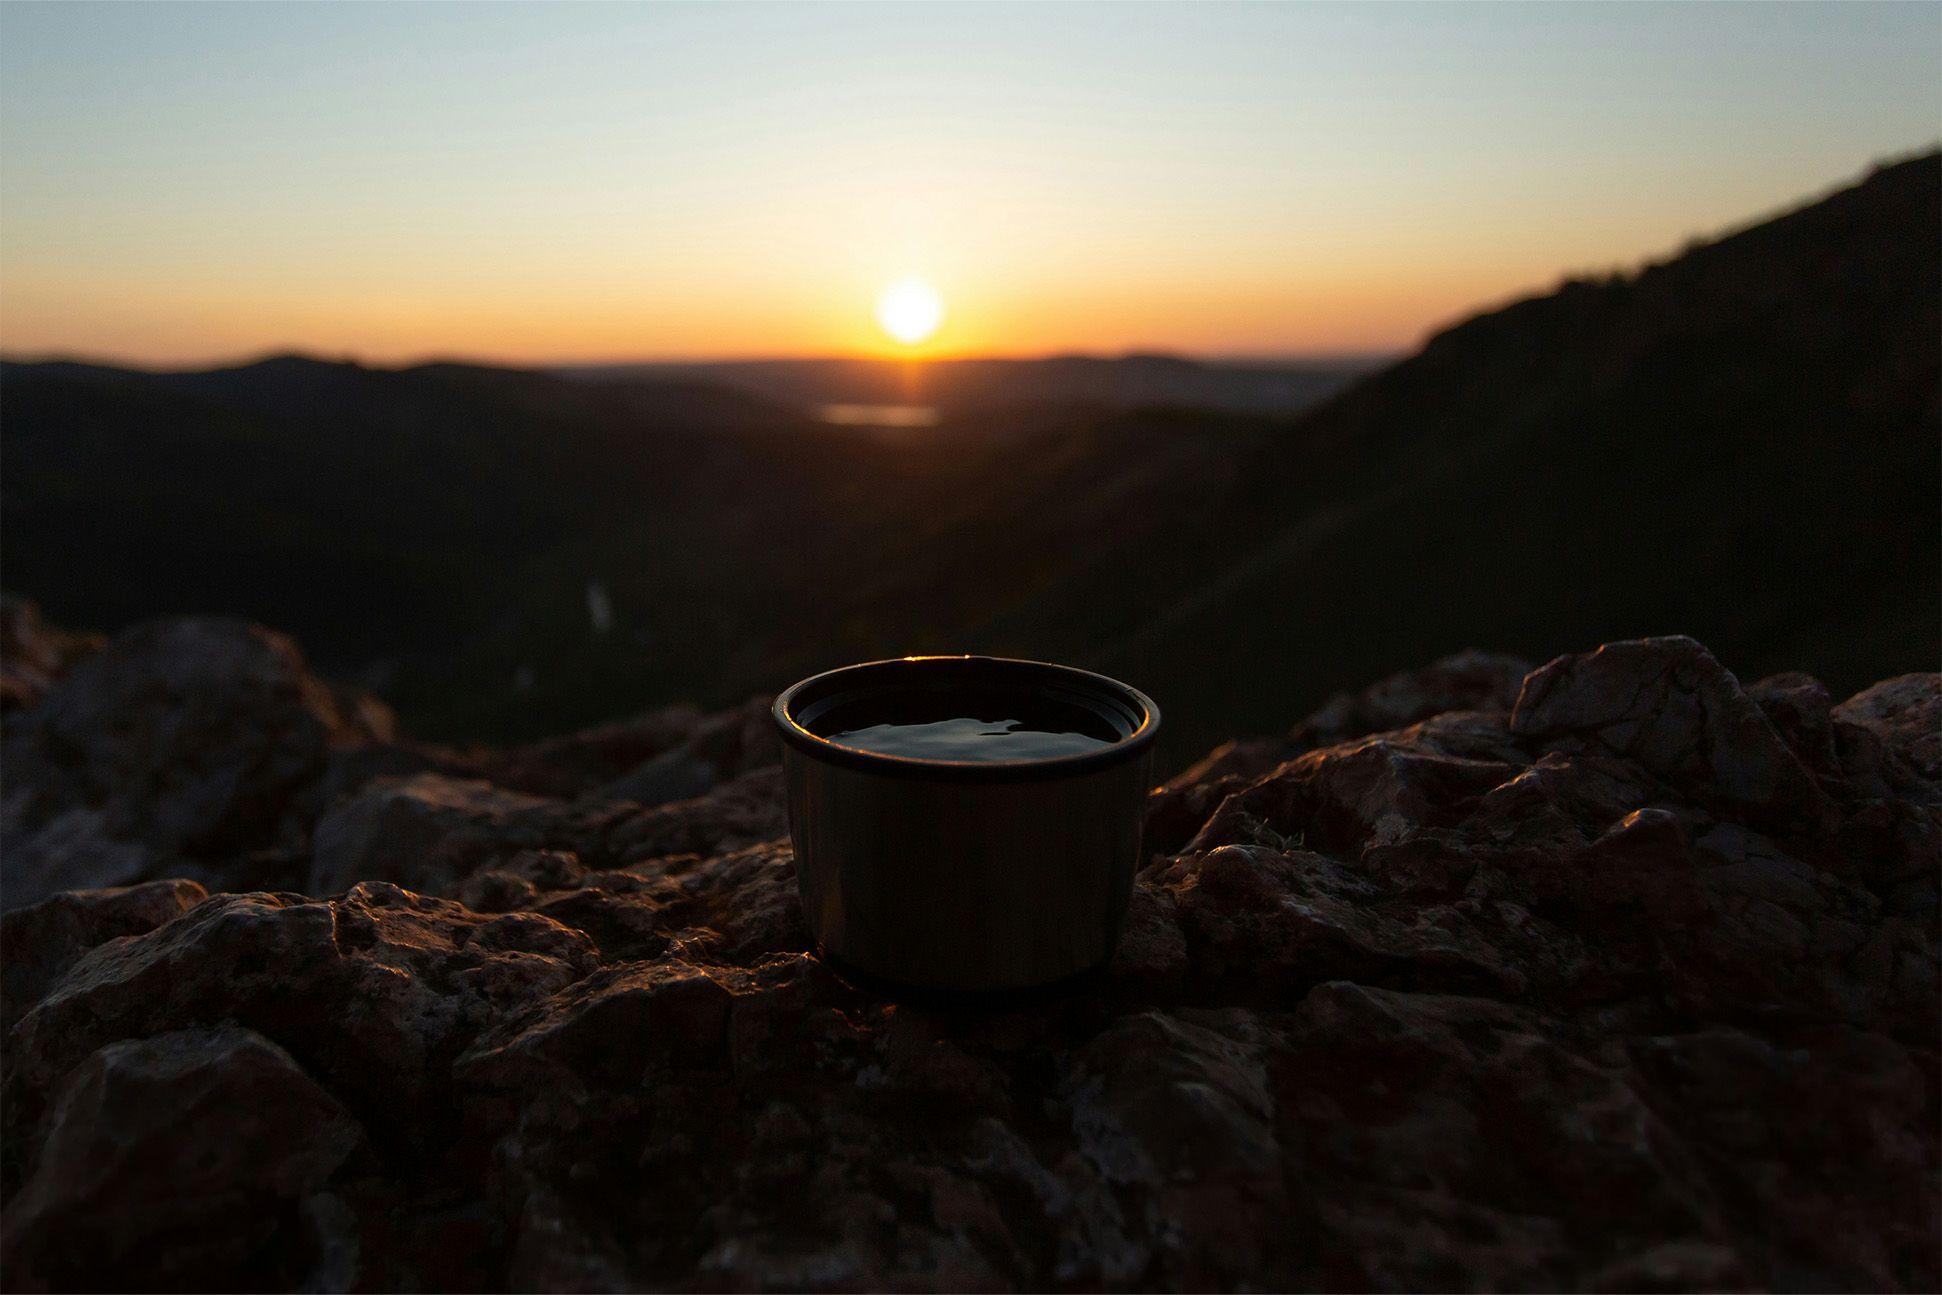 How to make barista style coffee when you’re in the wild